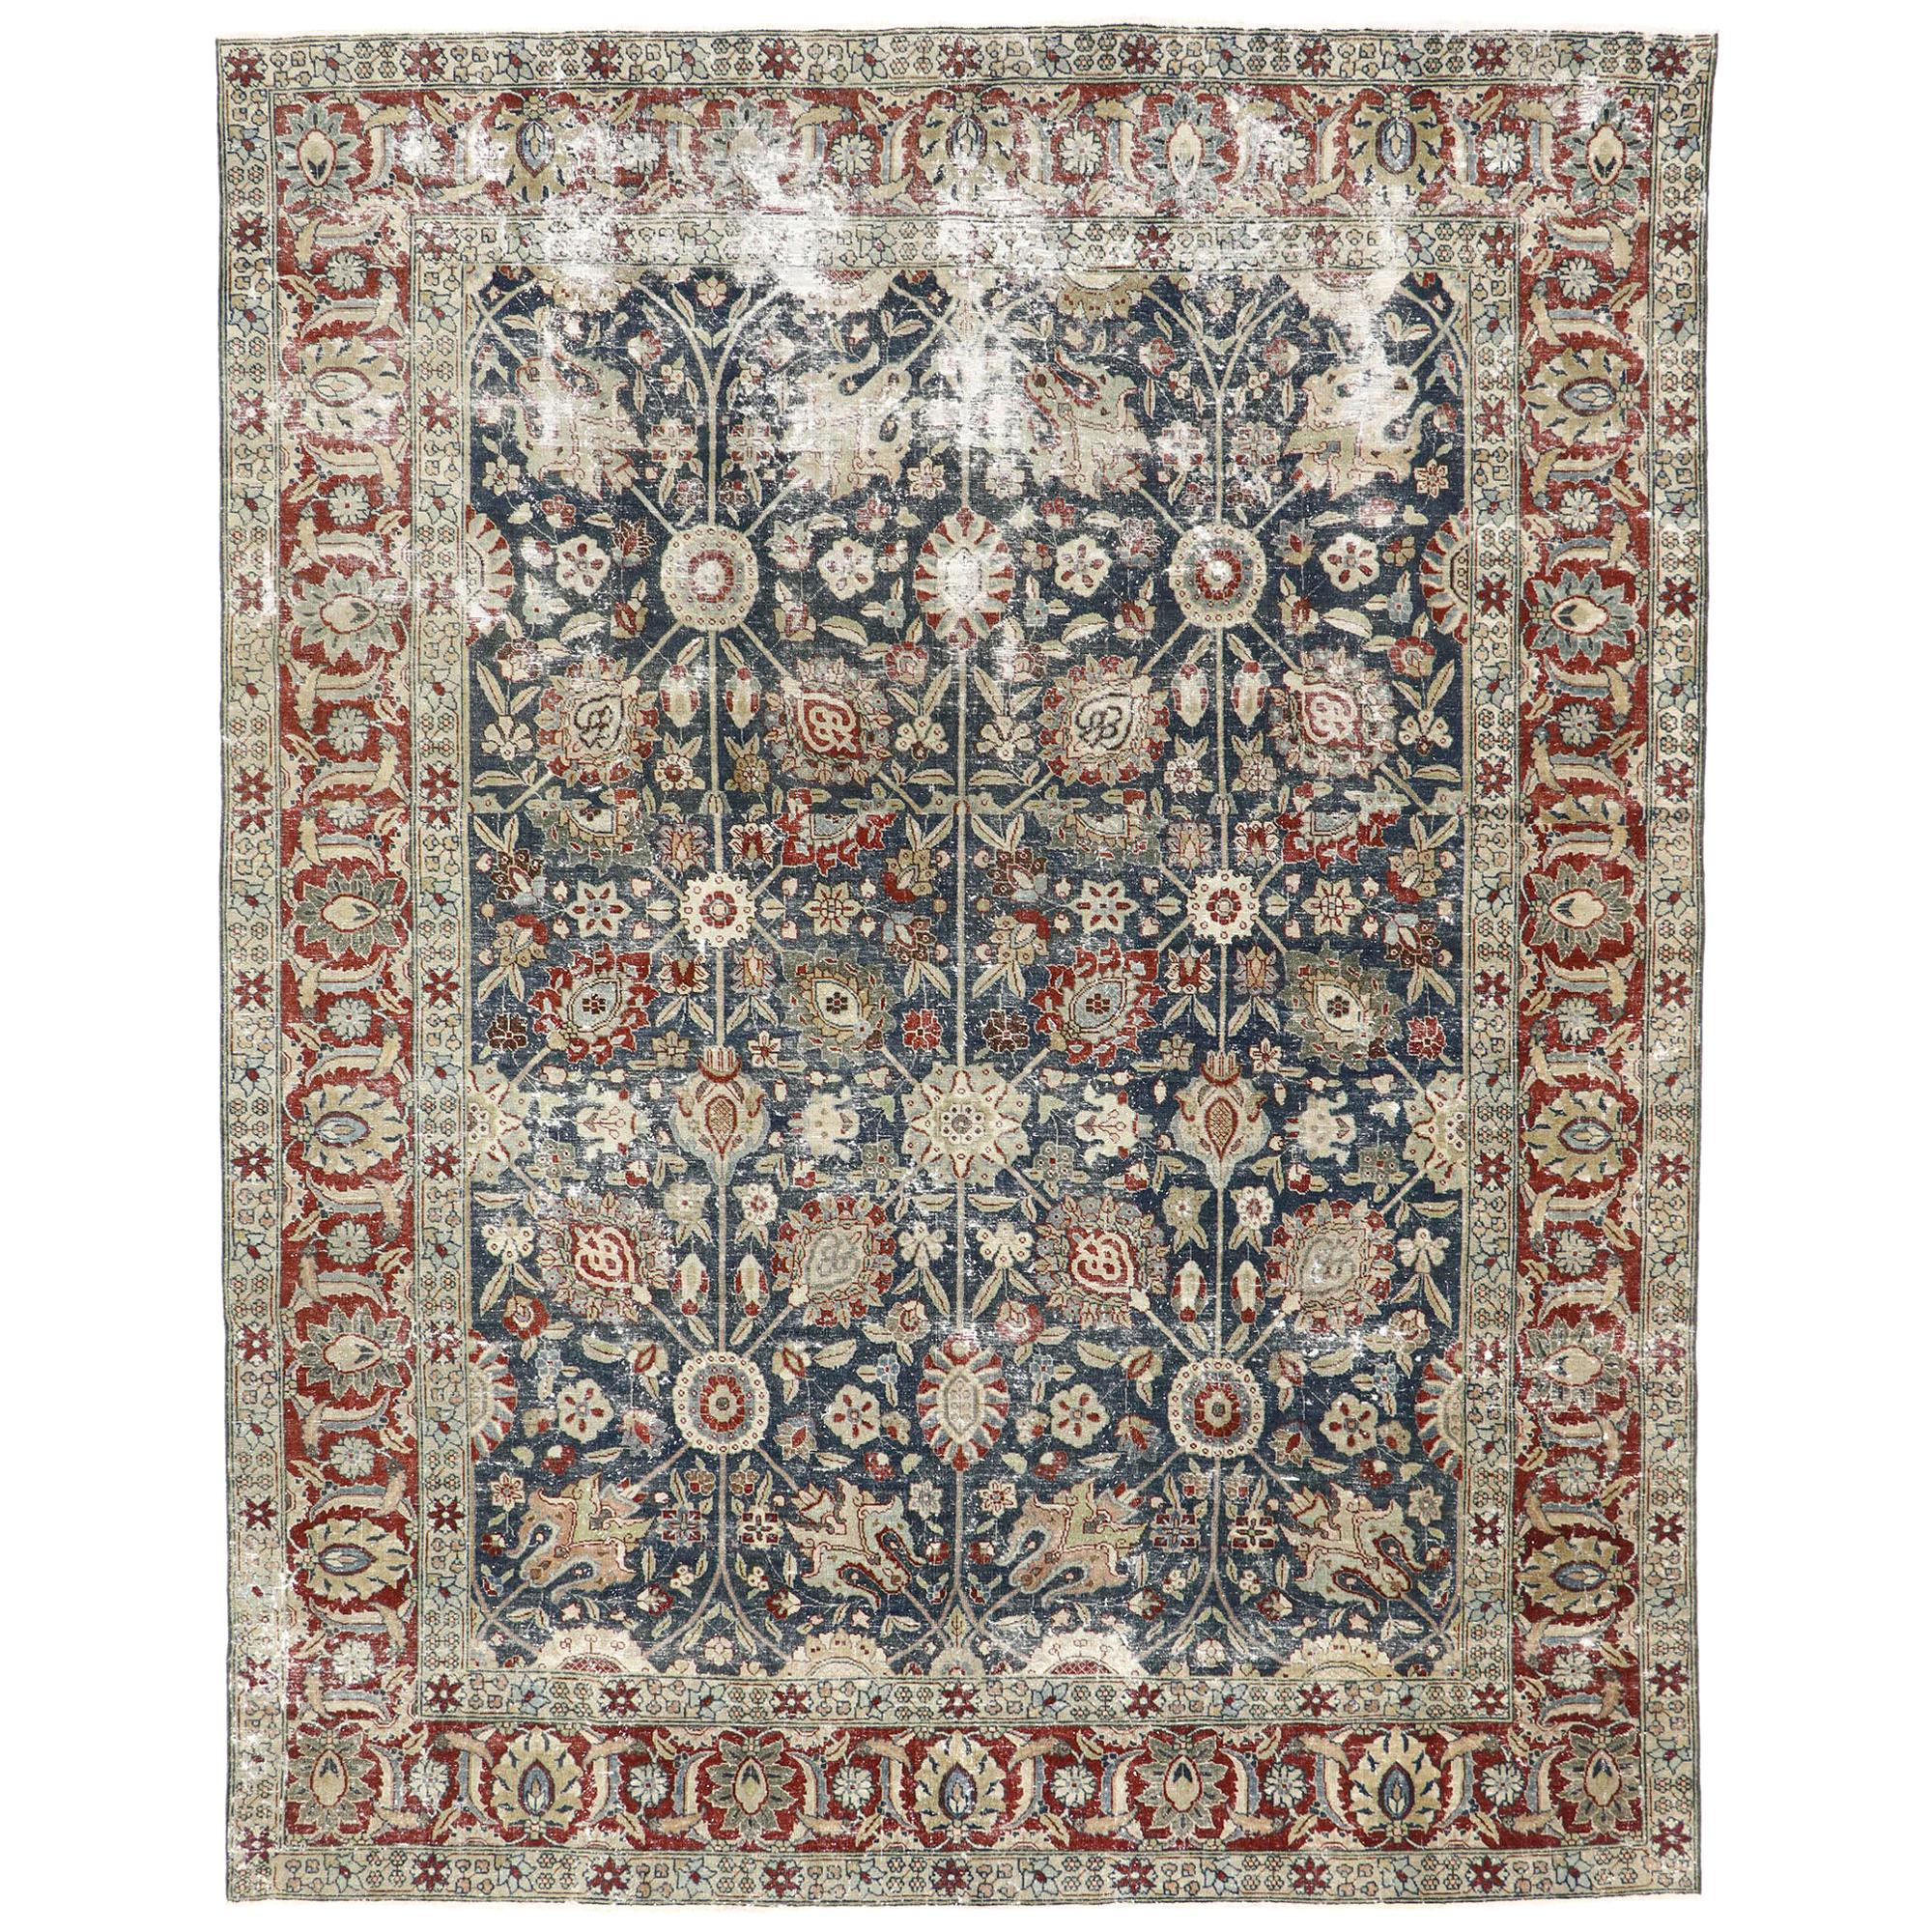 Distressed Antique Persian Tabriz Rug with Rustic Old World English Style For Sale